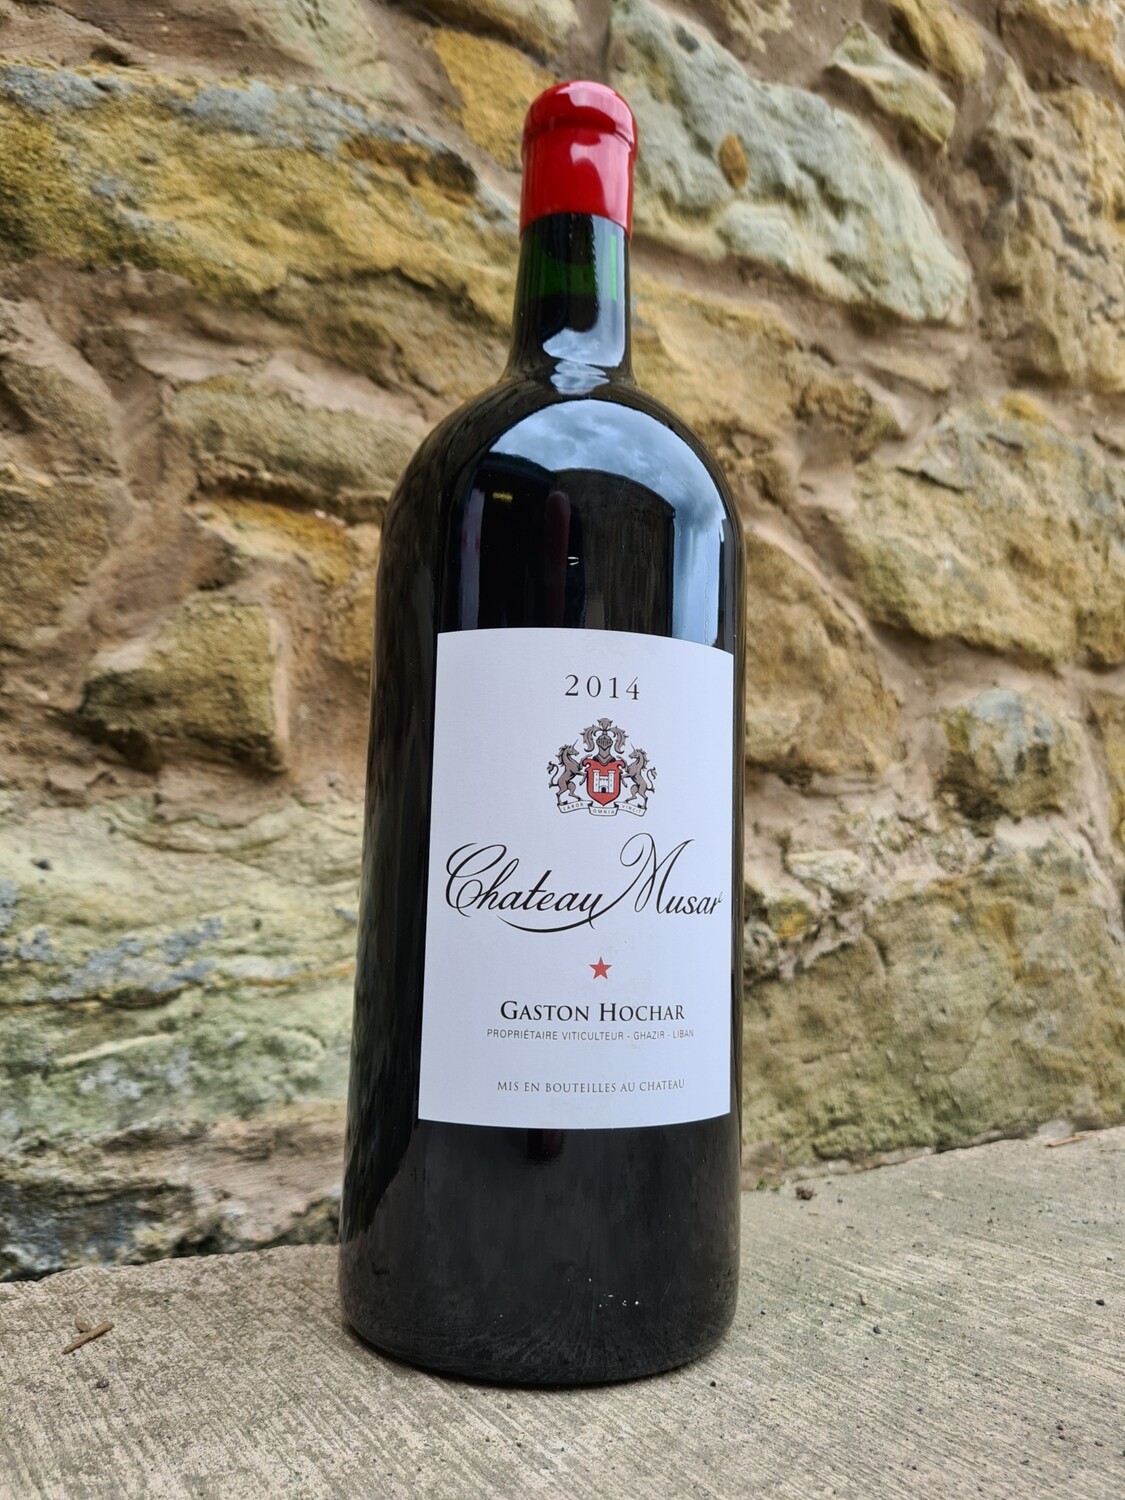 Chateau Musar 2014 Double Magnum